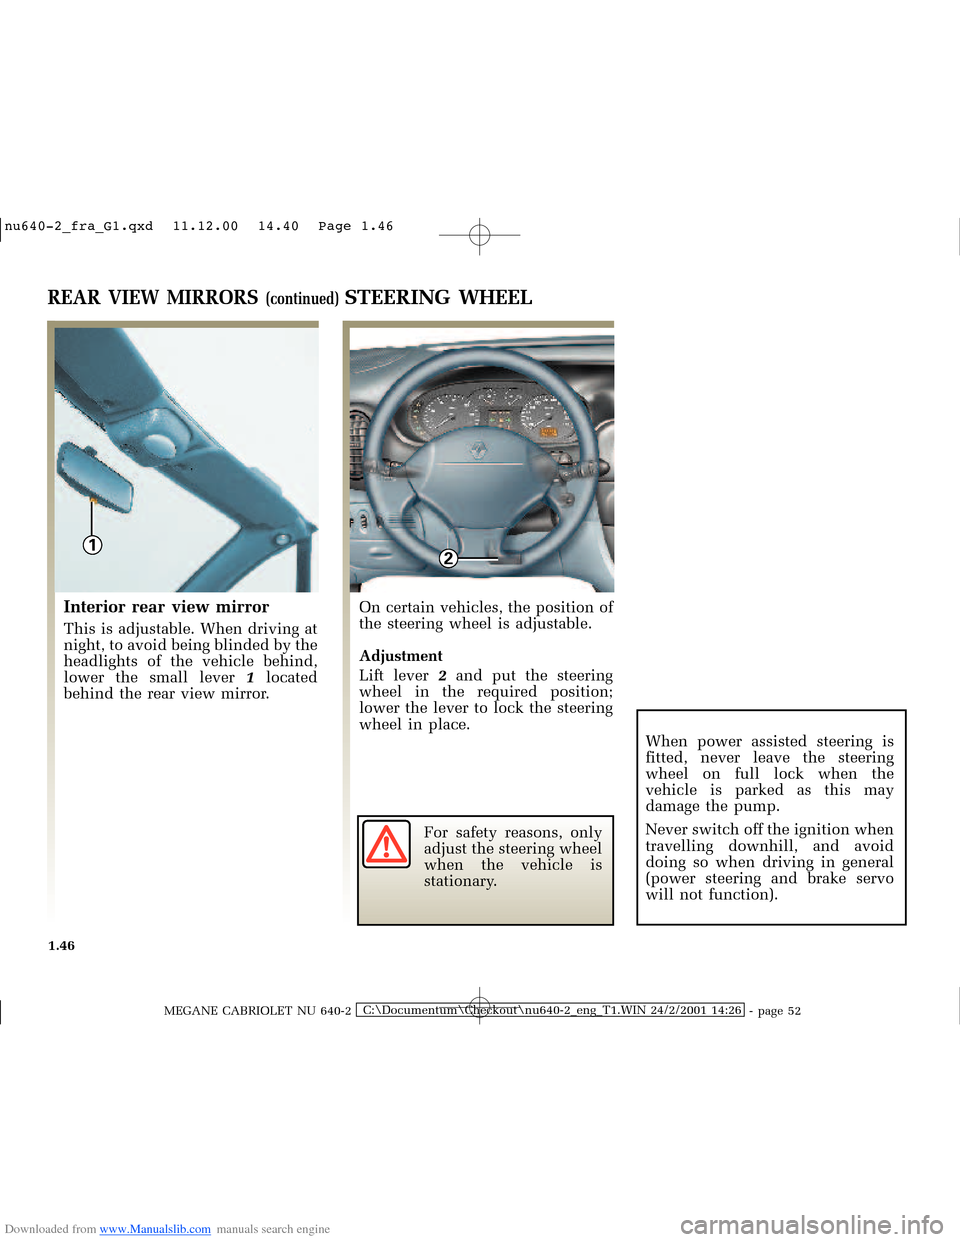 RENAULT MEGANE 2000 X64 / 1.G Workshop Manual Downloaded from www.Manualslib.com manuals search engine 12
�Q�X������B�I�U�D�B�*���T�[�G� � ��������� � ������ � �3�D�J�H� ����
MEGANE CABRIOLET NU 640-2C:\Documentum\C